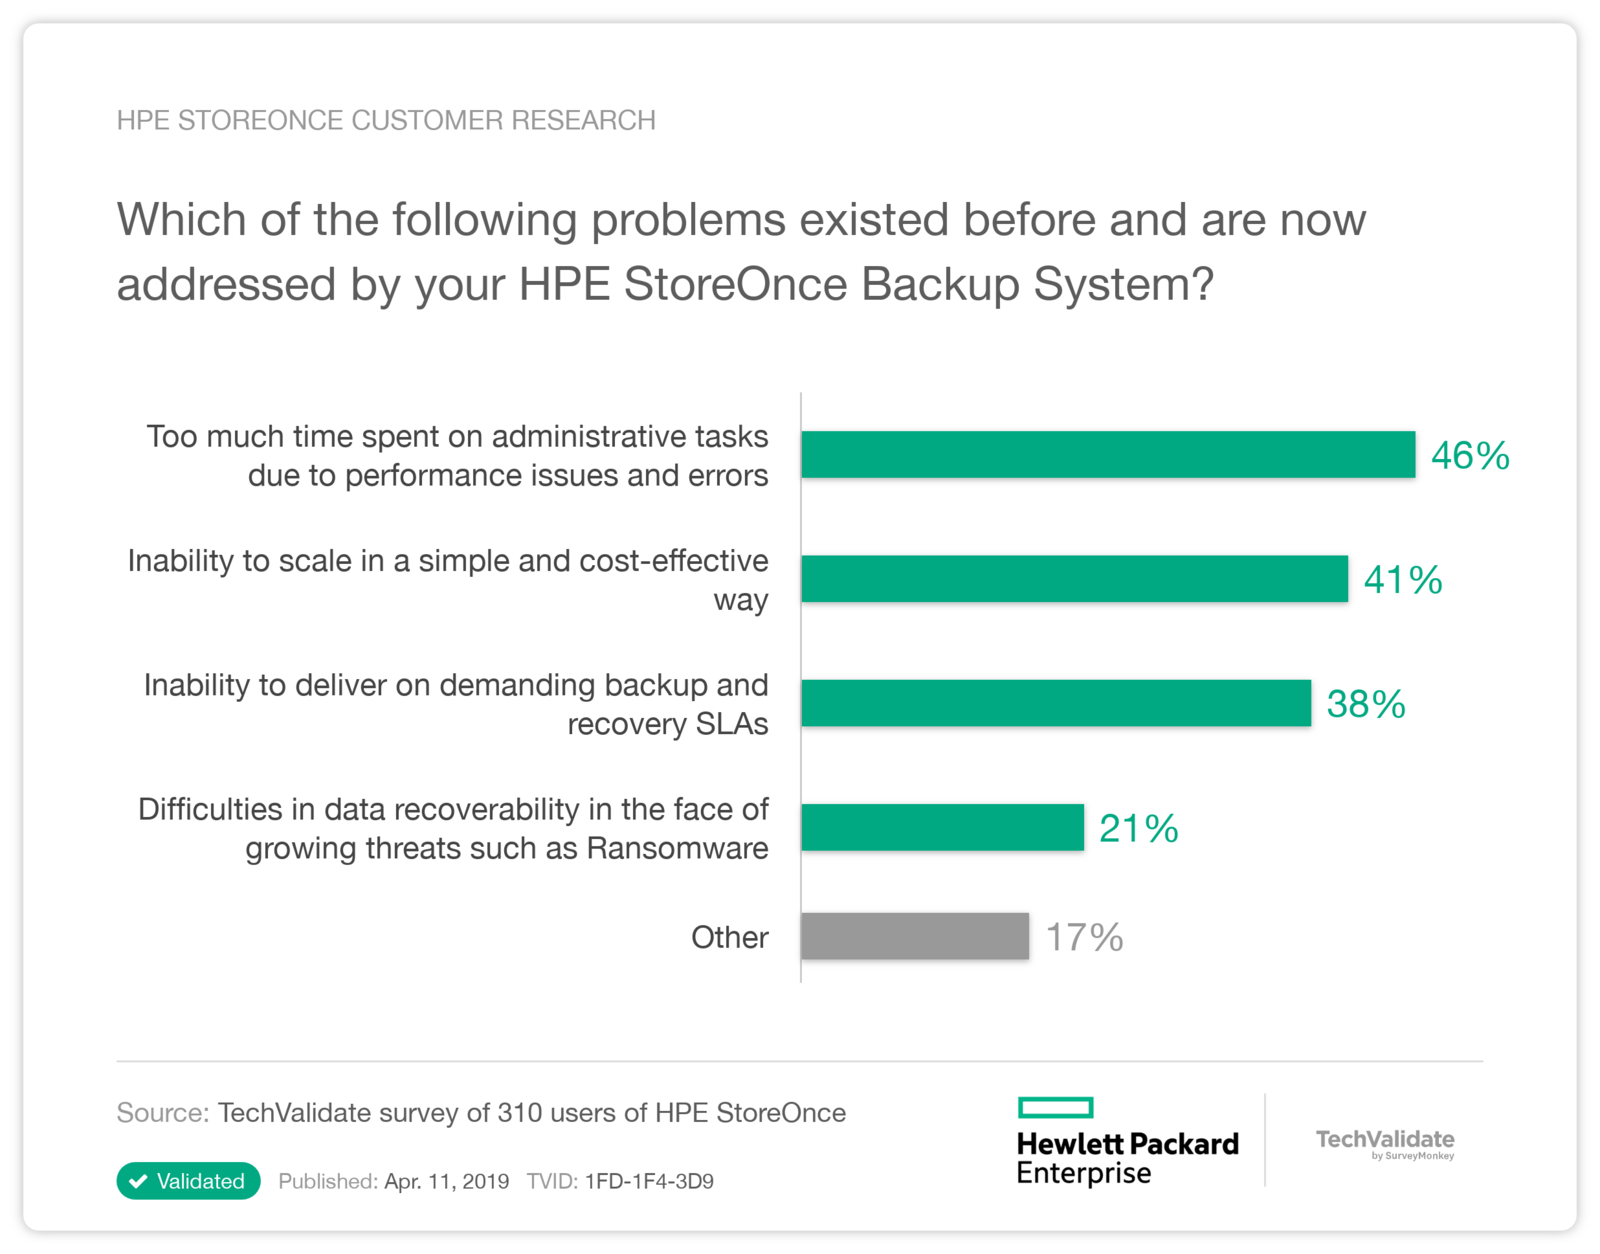 HPE StoreOnce Customer Research